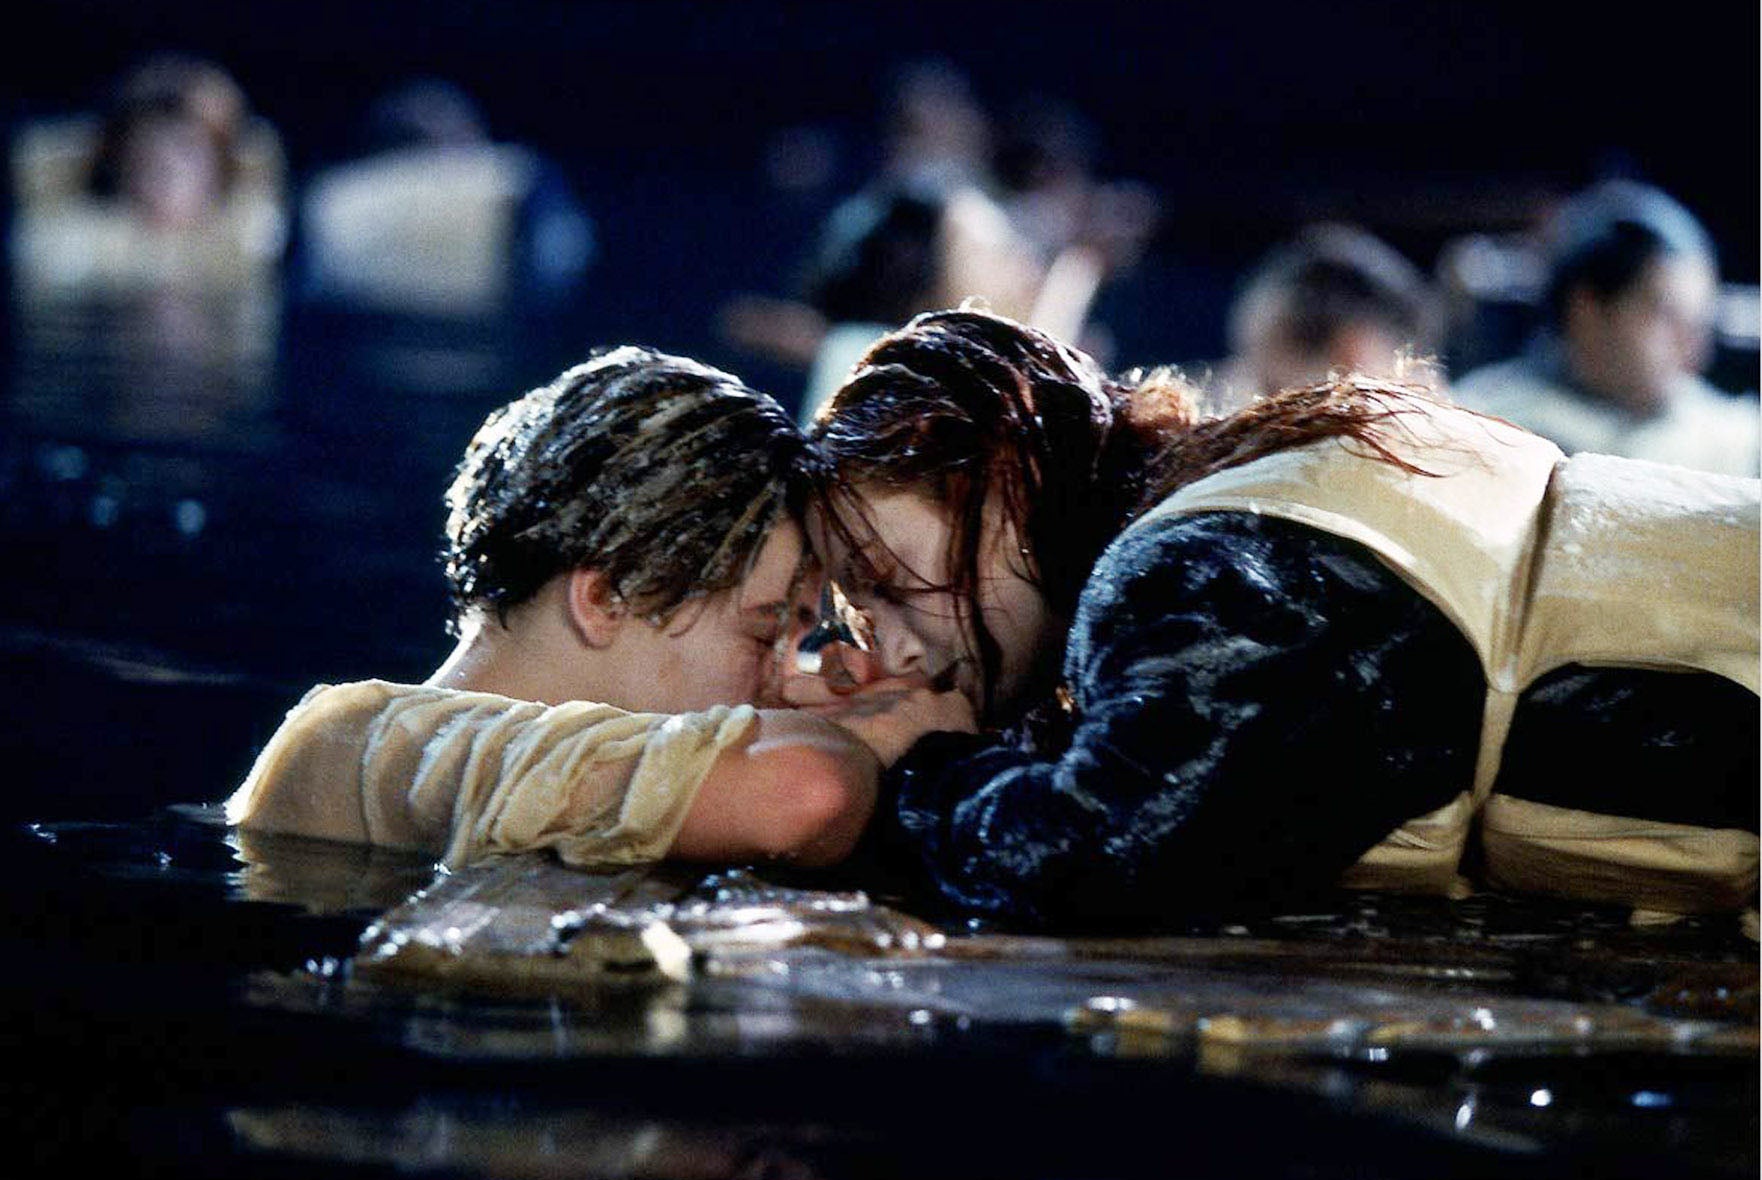 Kate Winslet got dragged under water while filming ‘Titanic’